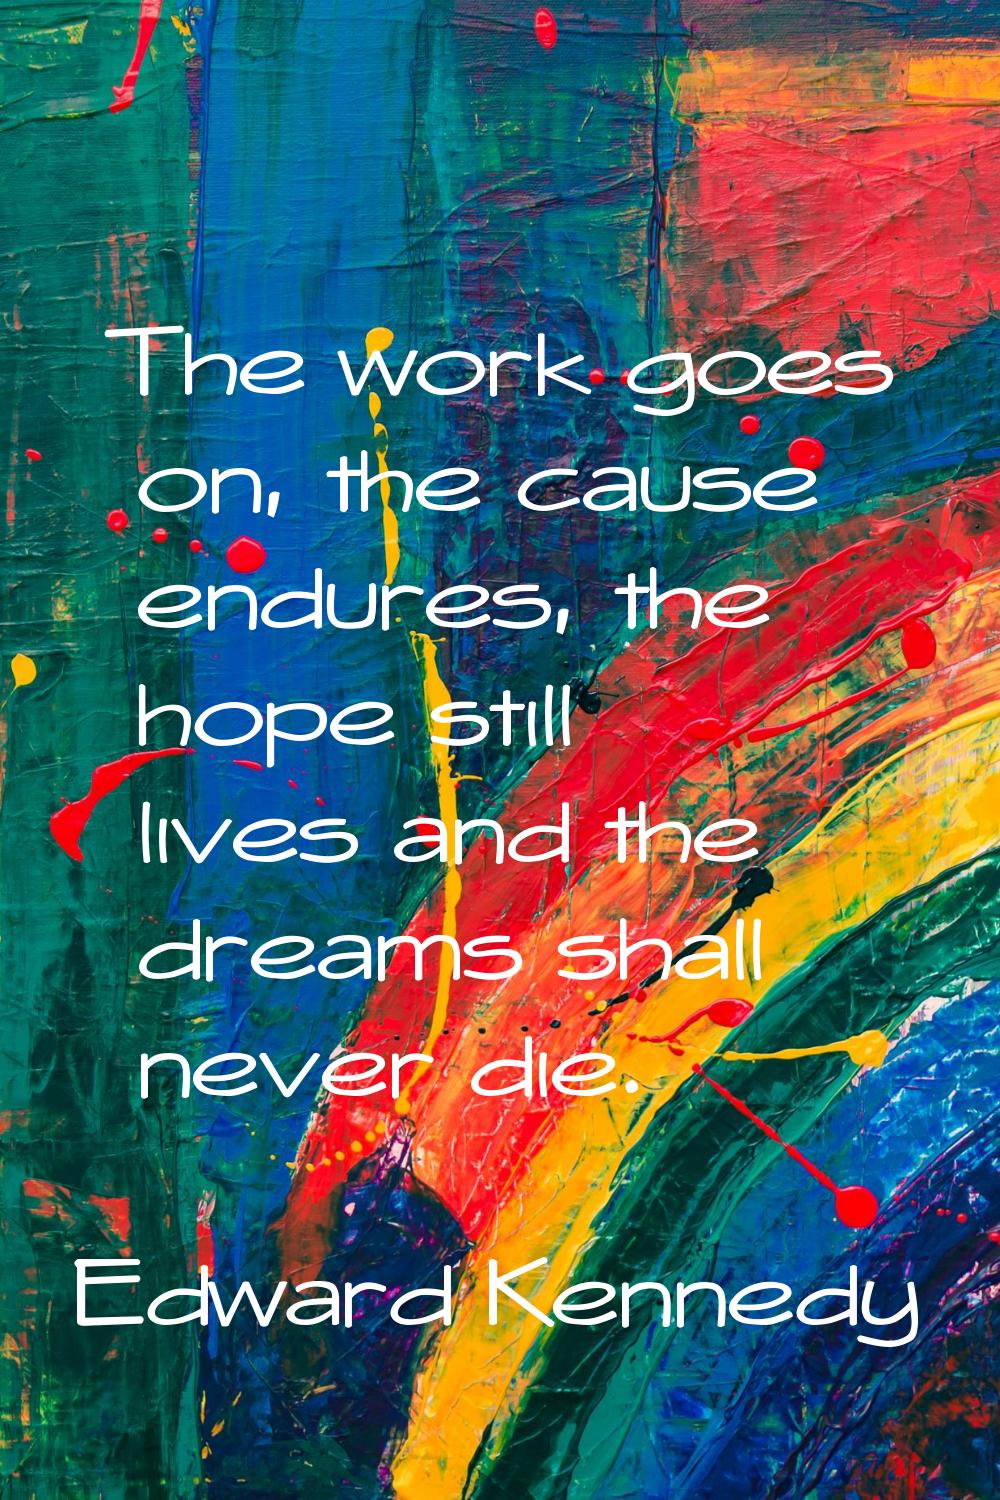 The work goes on, the cause endures, the hope still lives and the dreams shall never die.